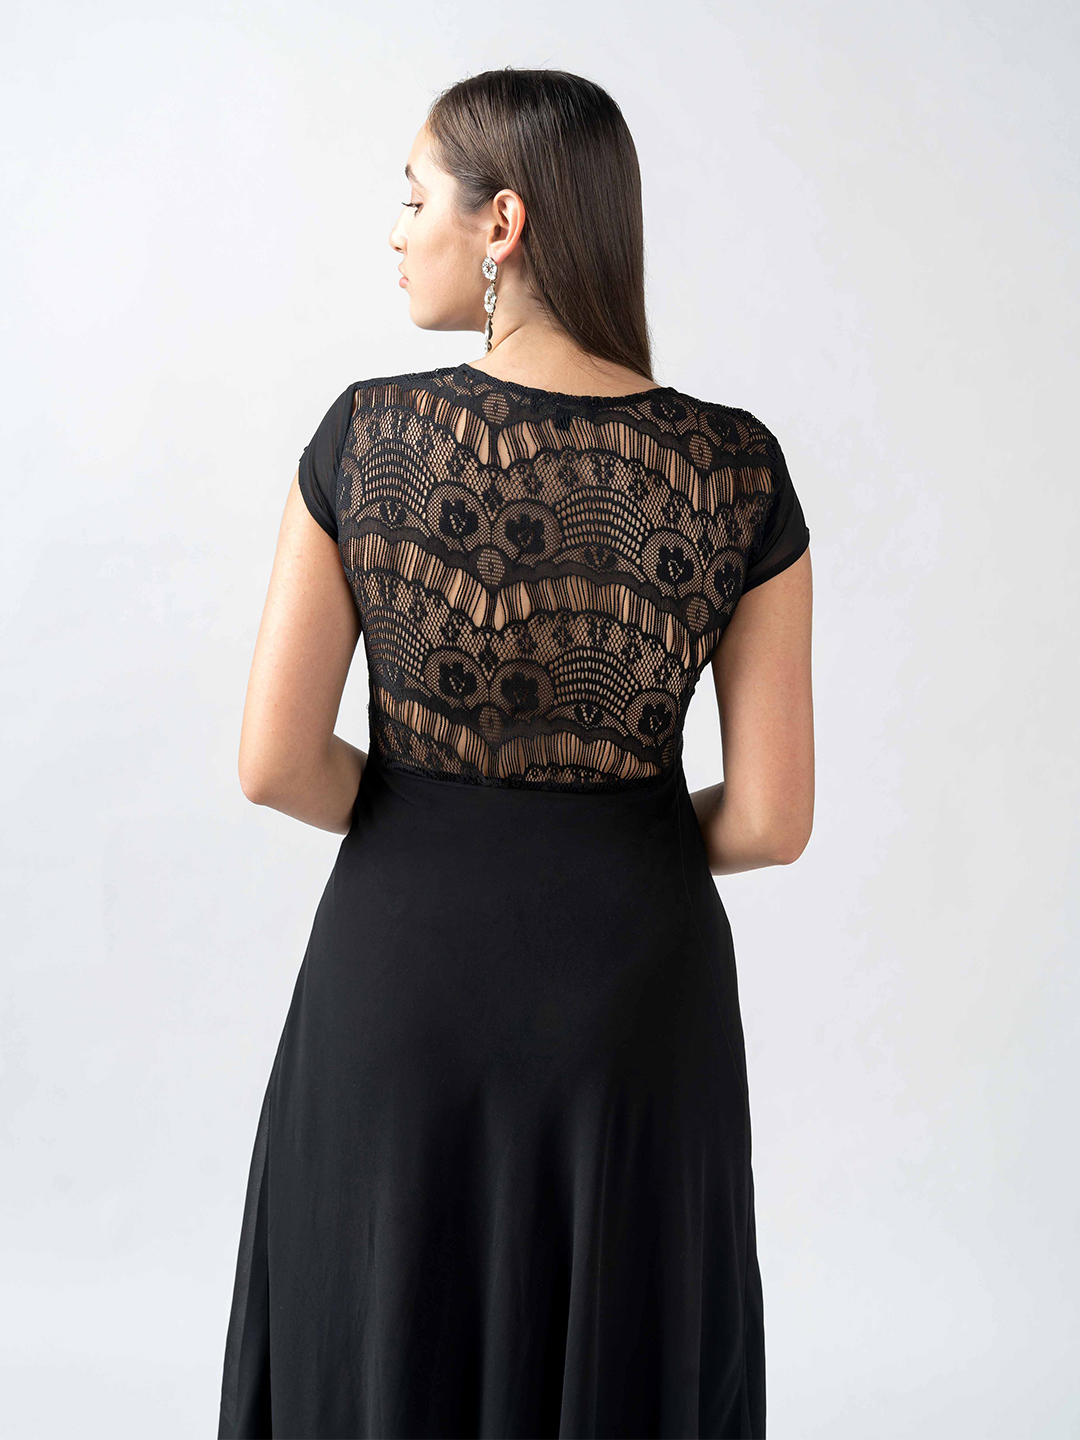 Lace gown dress - Back